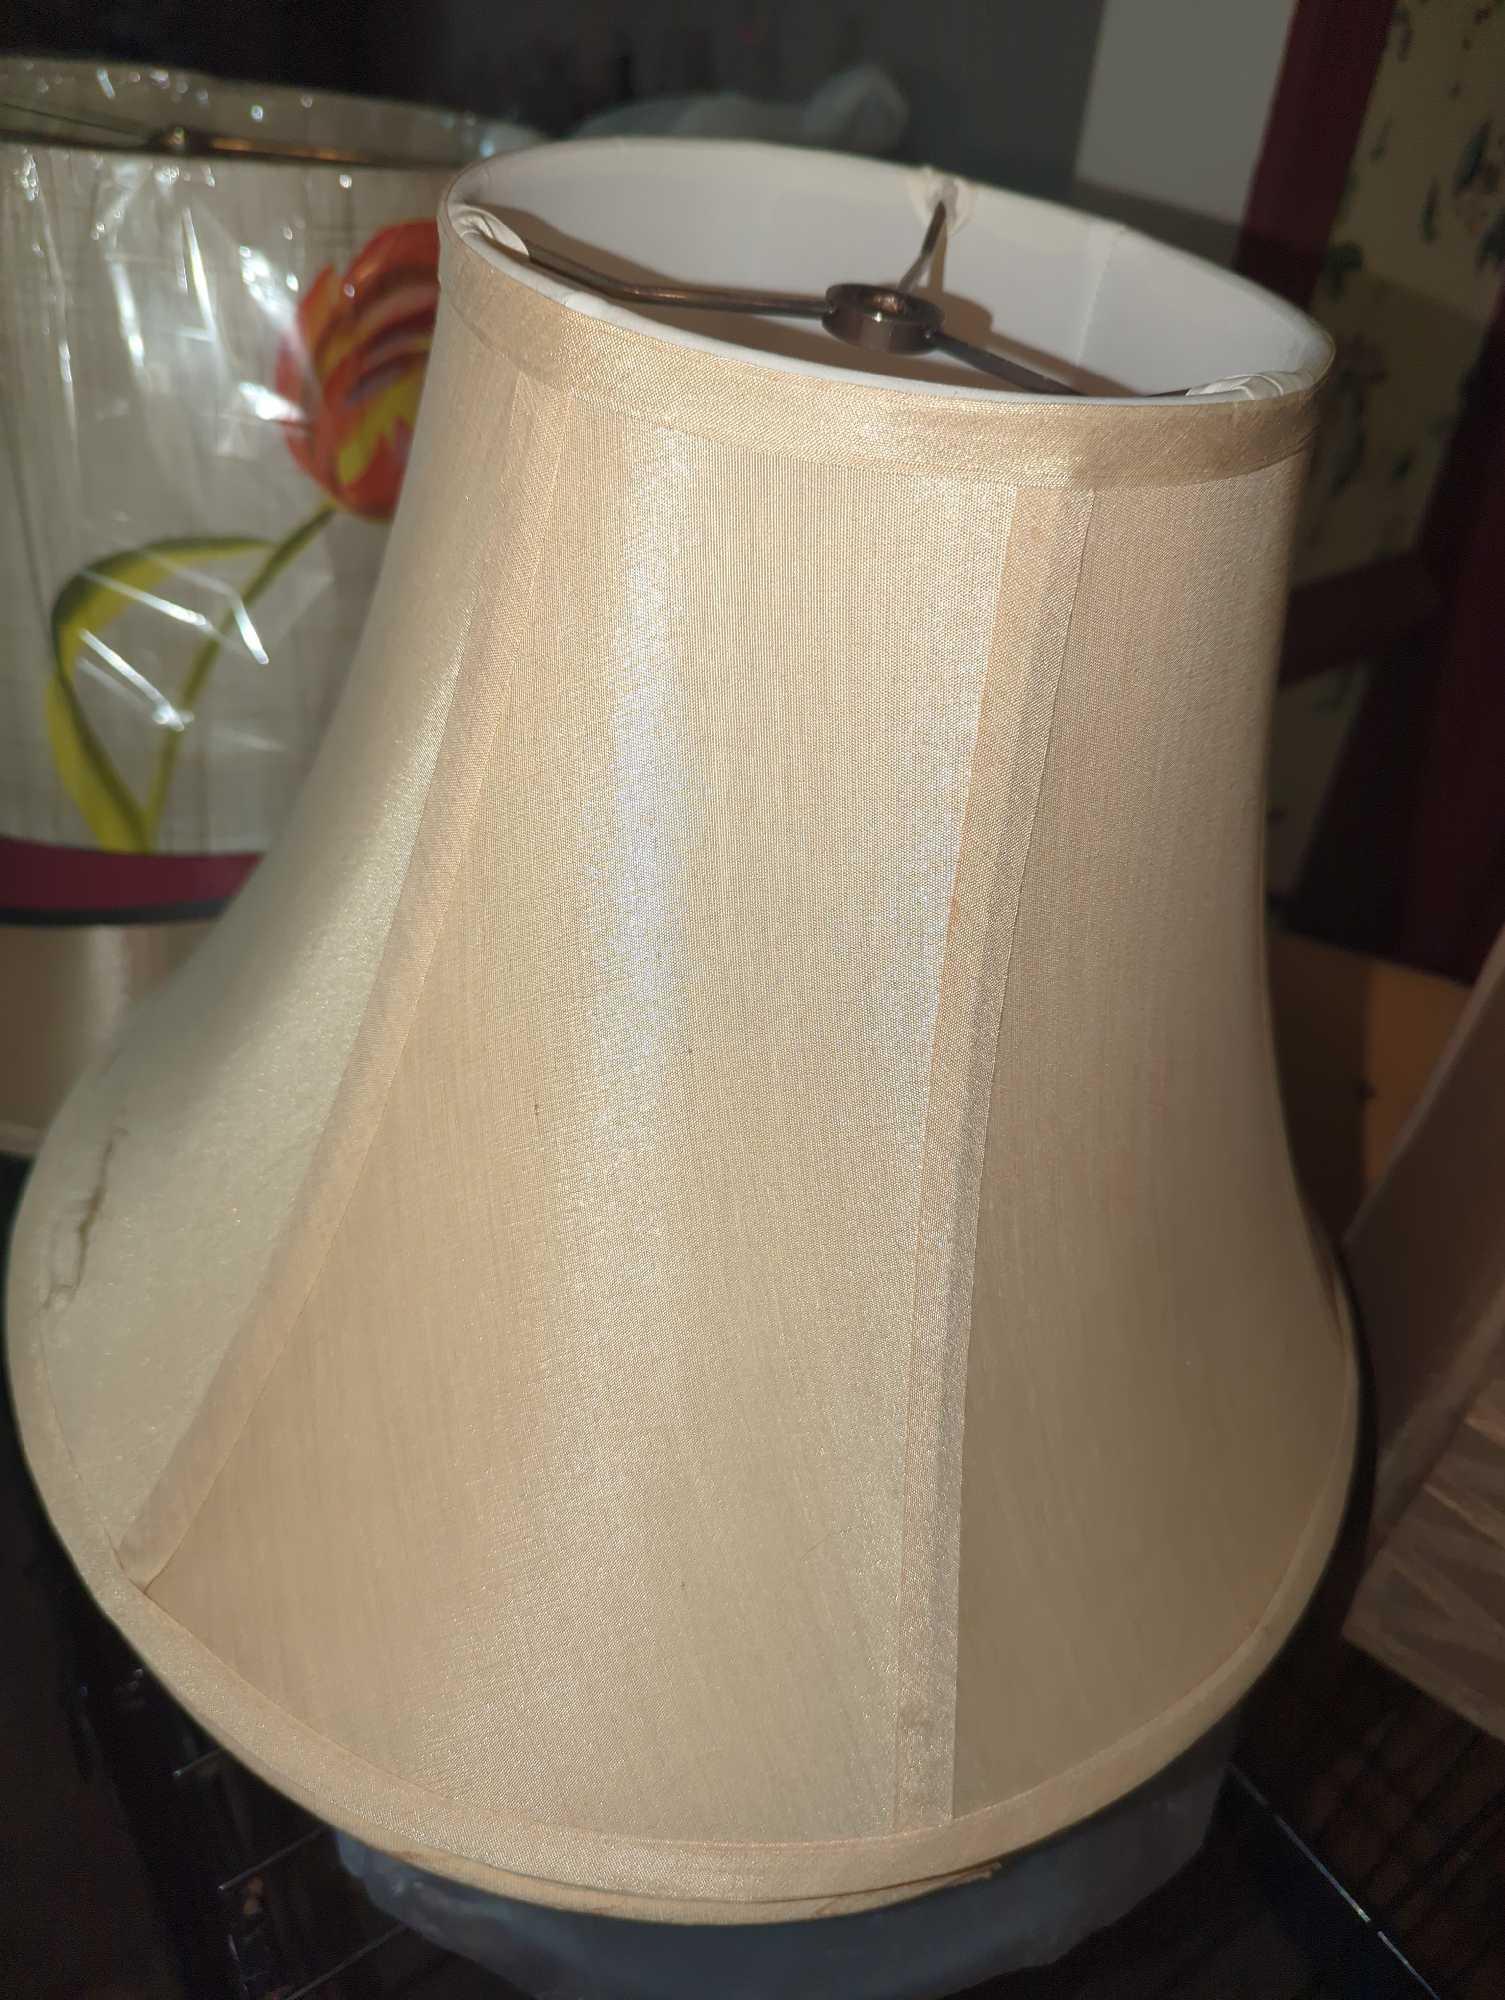 (DR) LOT OF 10 LAMP SHADES IN AN ASSORTMENT OF SIZES, COLORS AND STYLES, WHAT YOU SEE IN THE PHOTOS